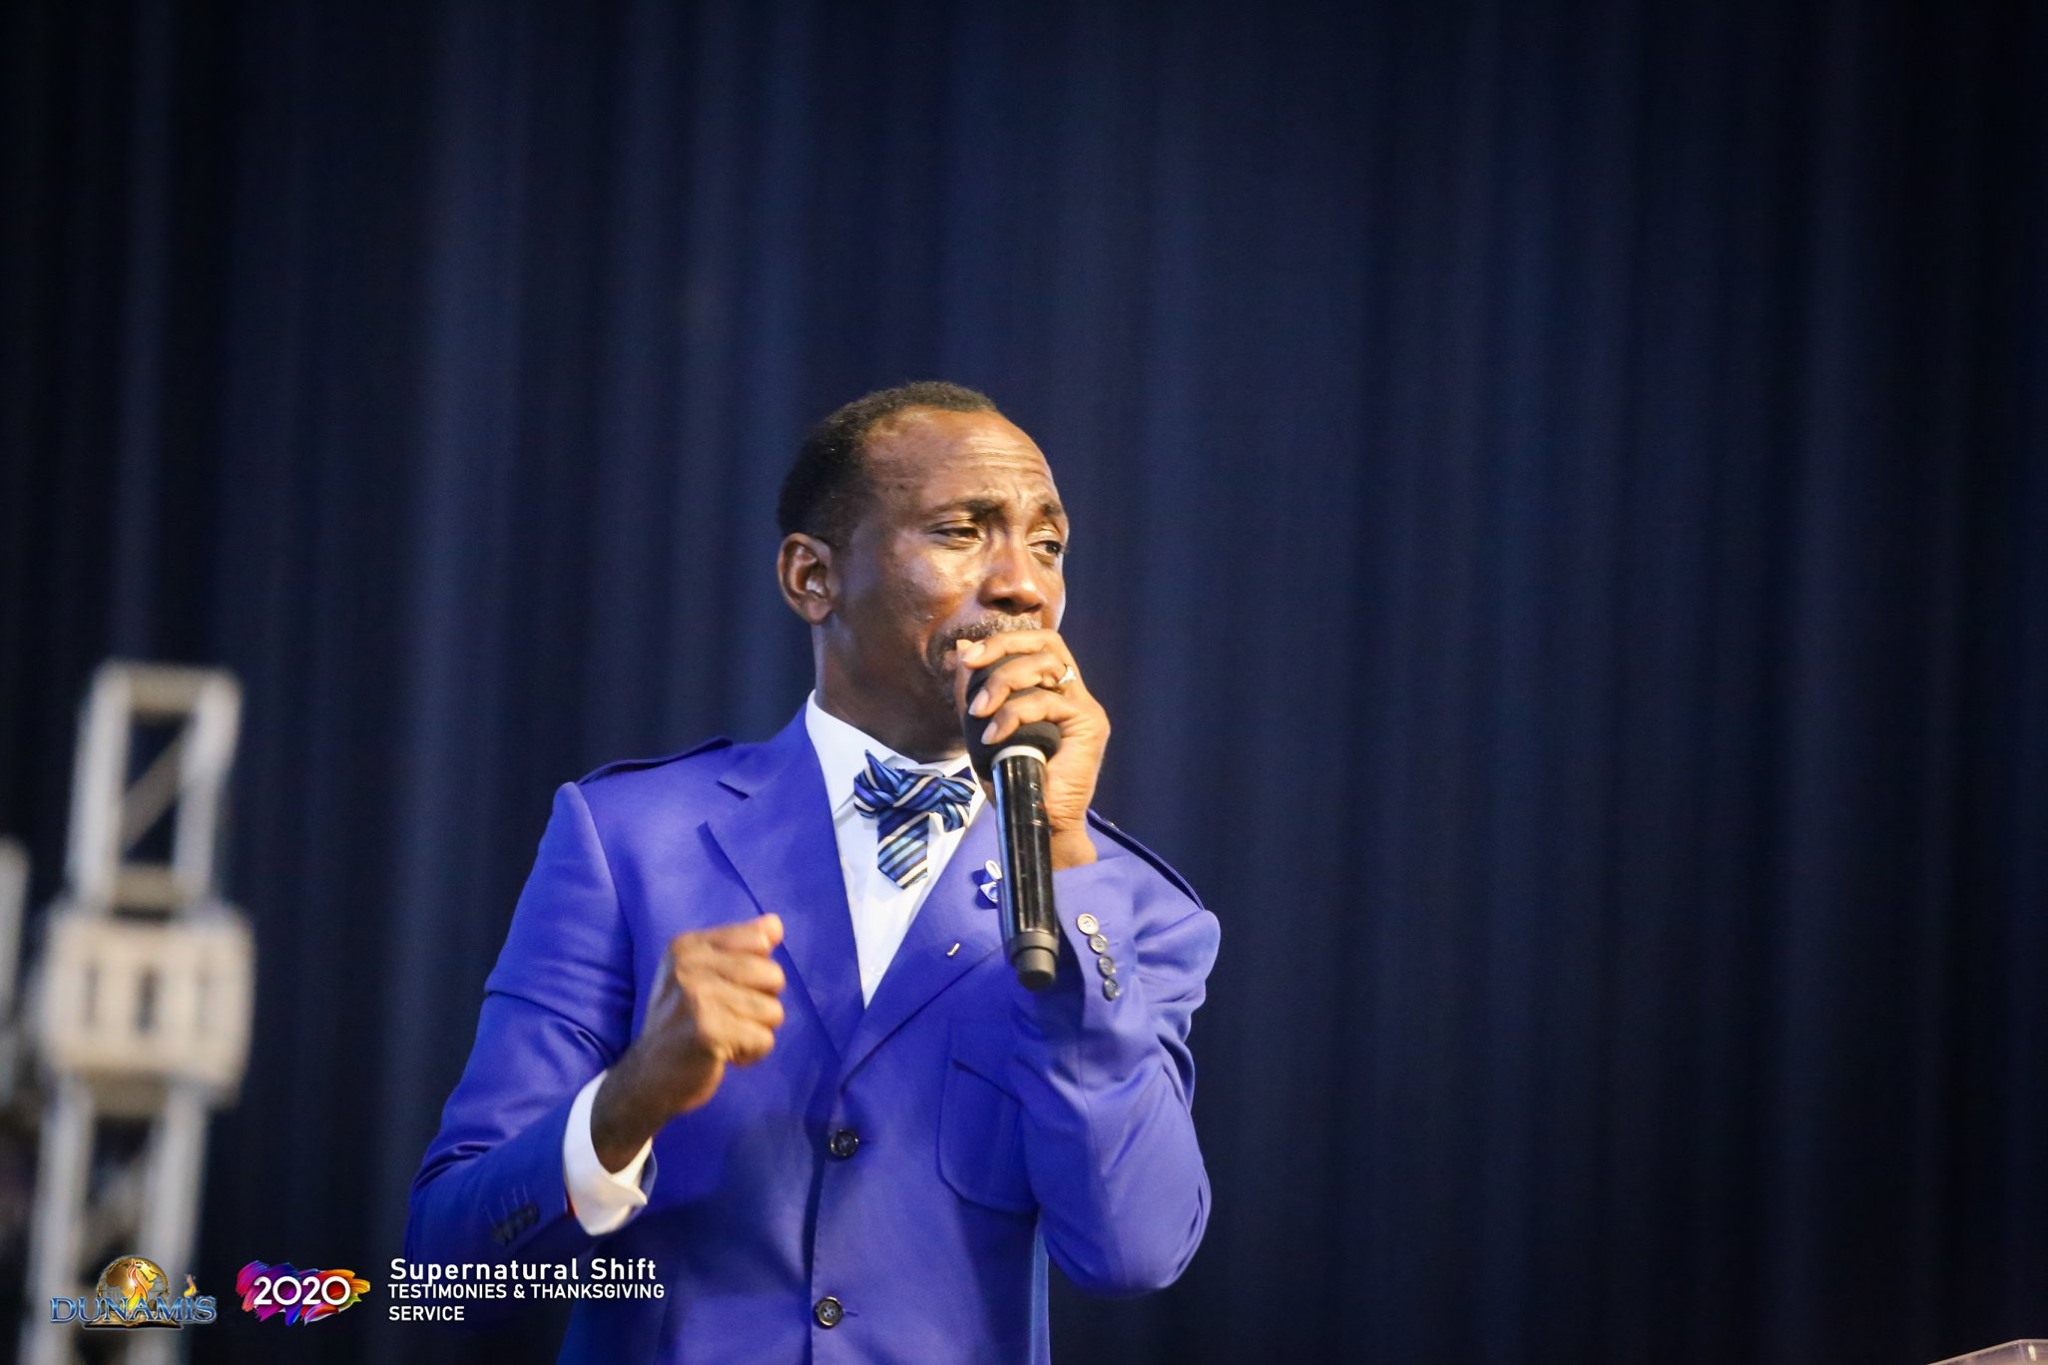 July 2020 Testimonies And Thanksgiving Prophetic Declaration by Dr Paul Enenche